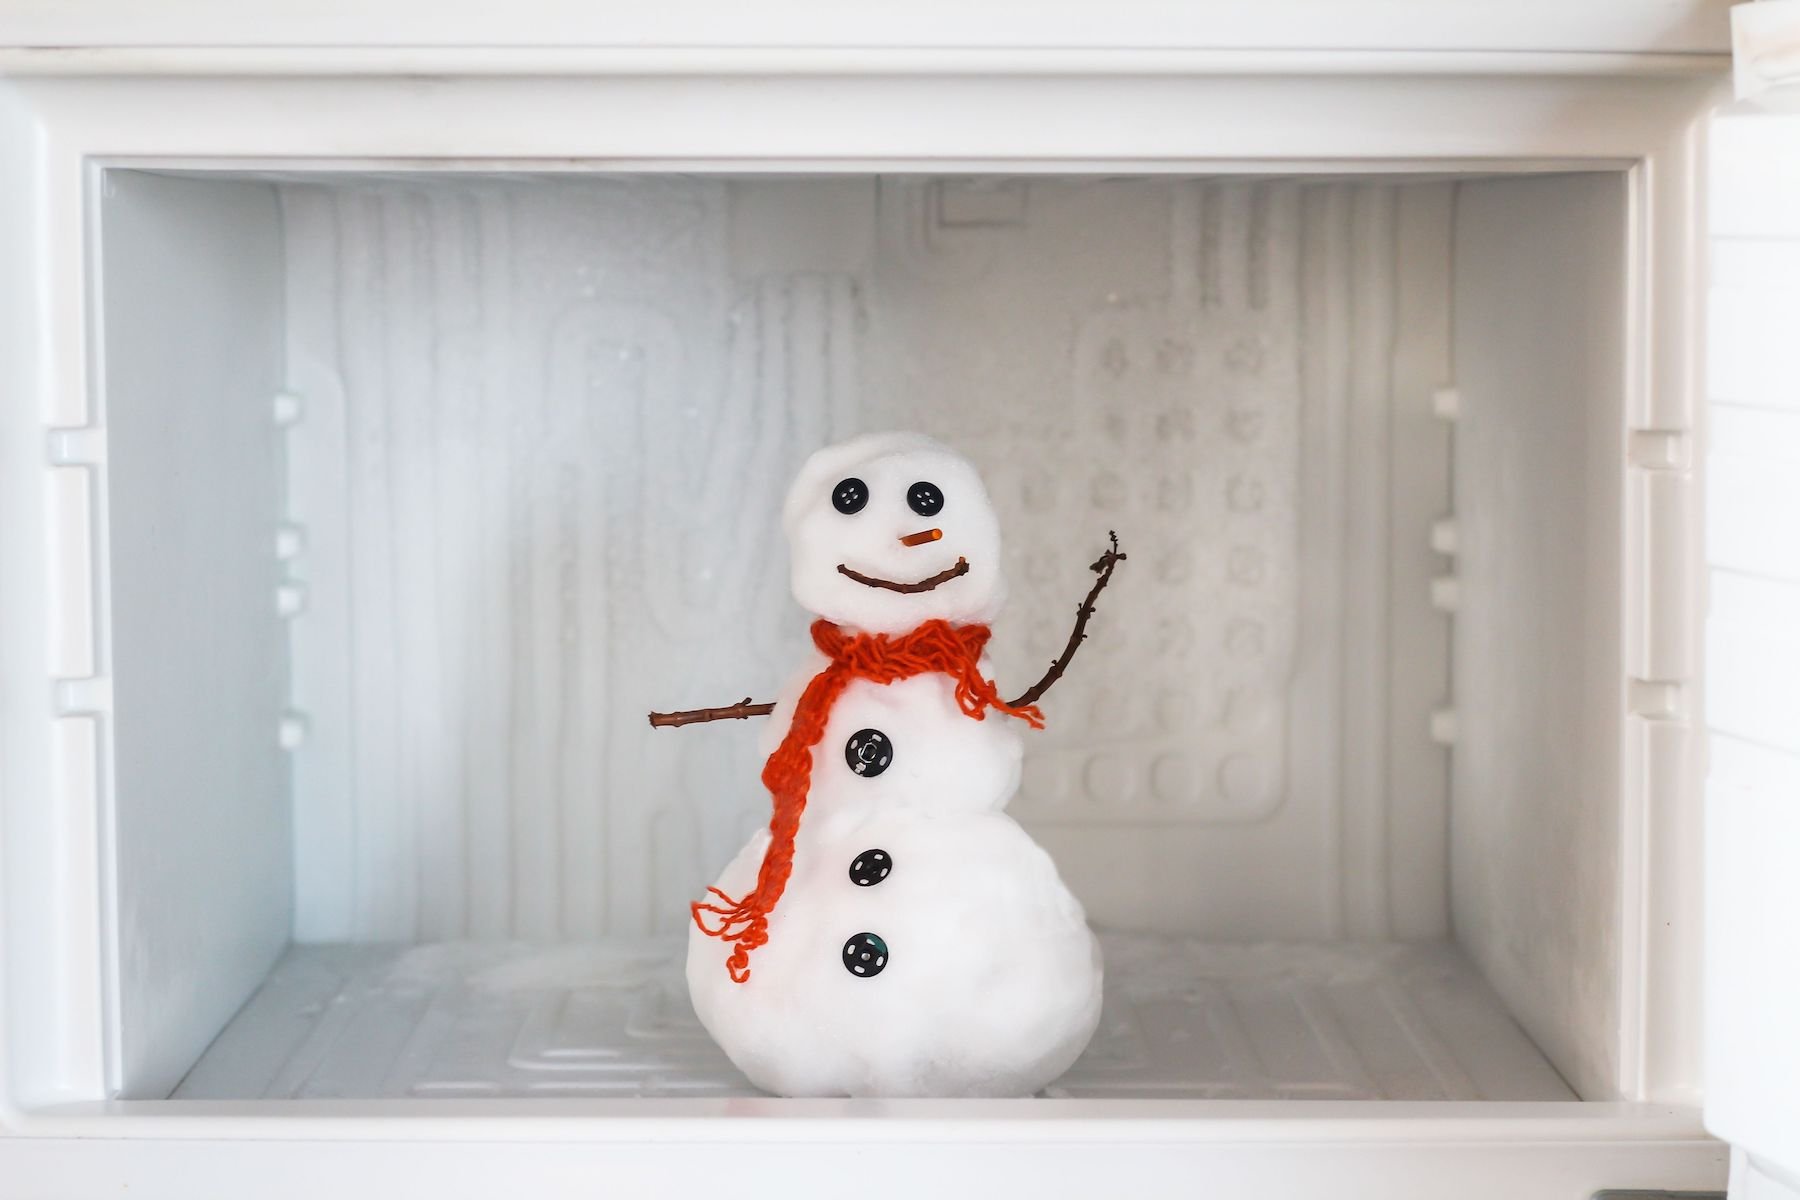 How to clear out your fridge and freezer - snowman in empty freezer